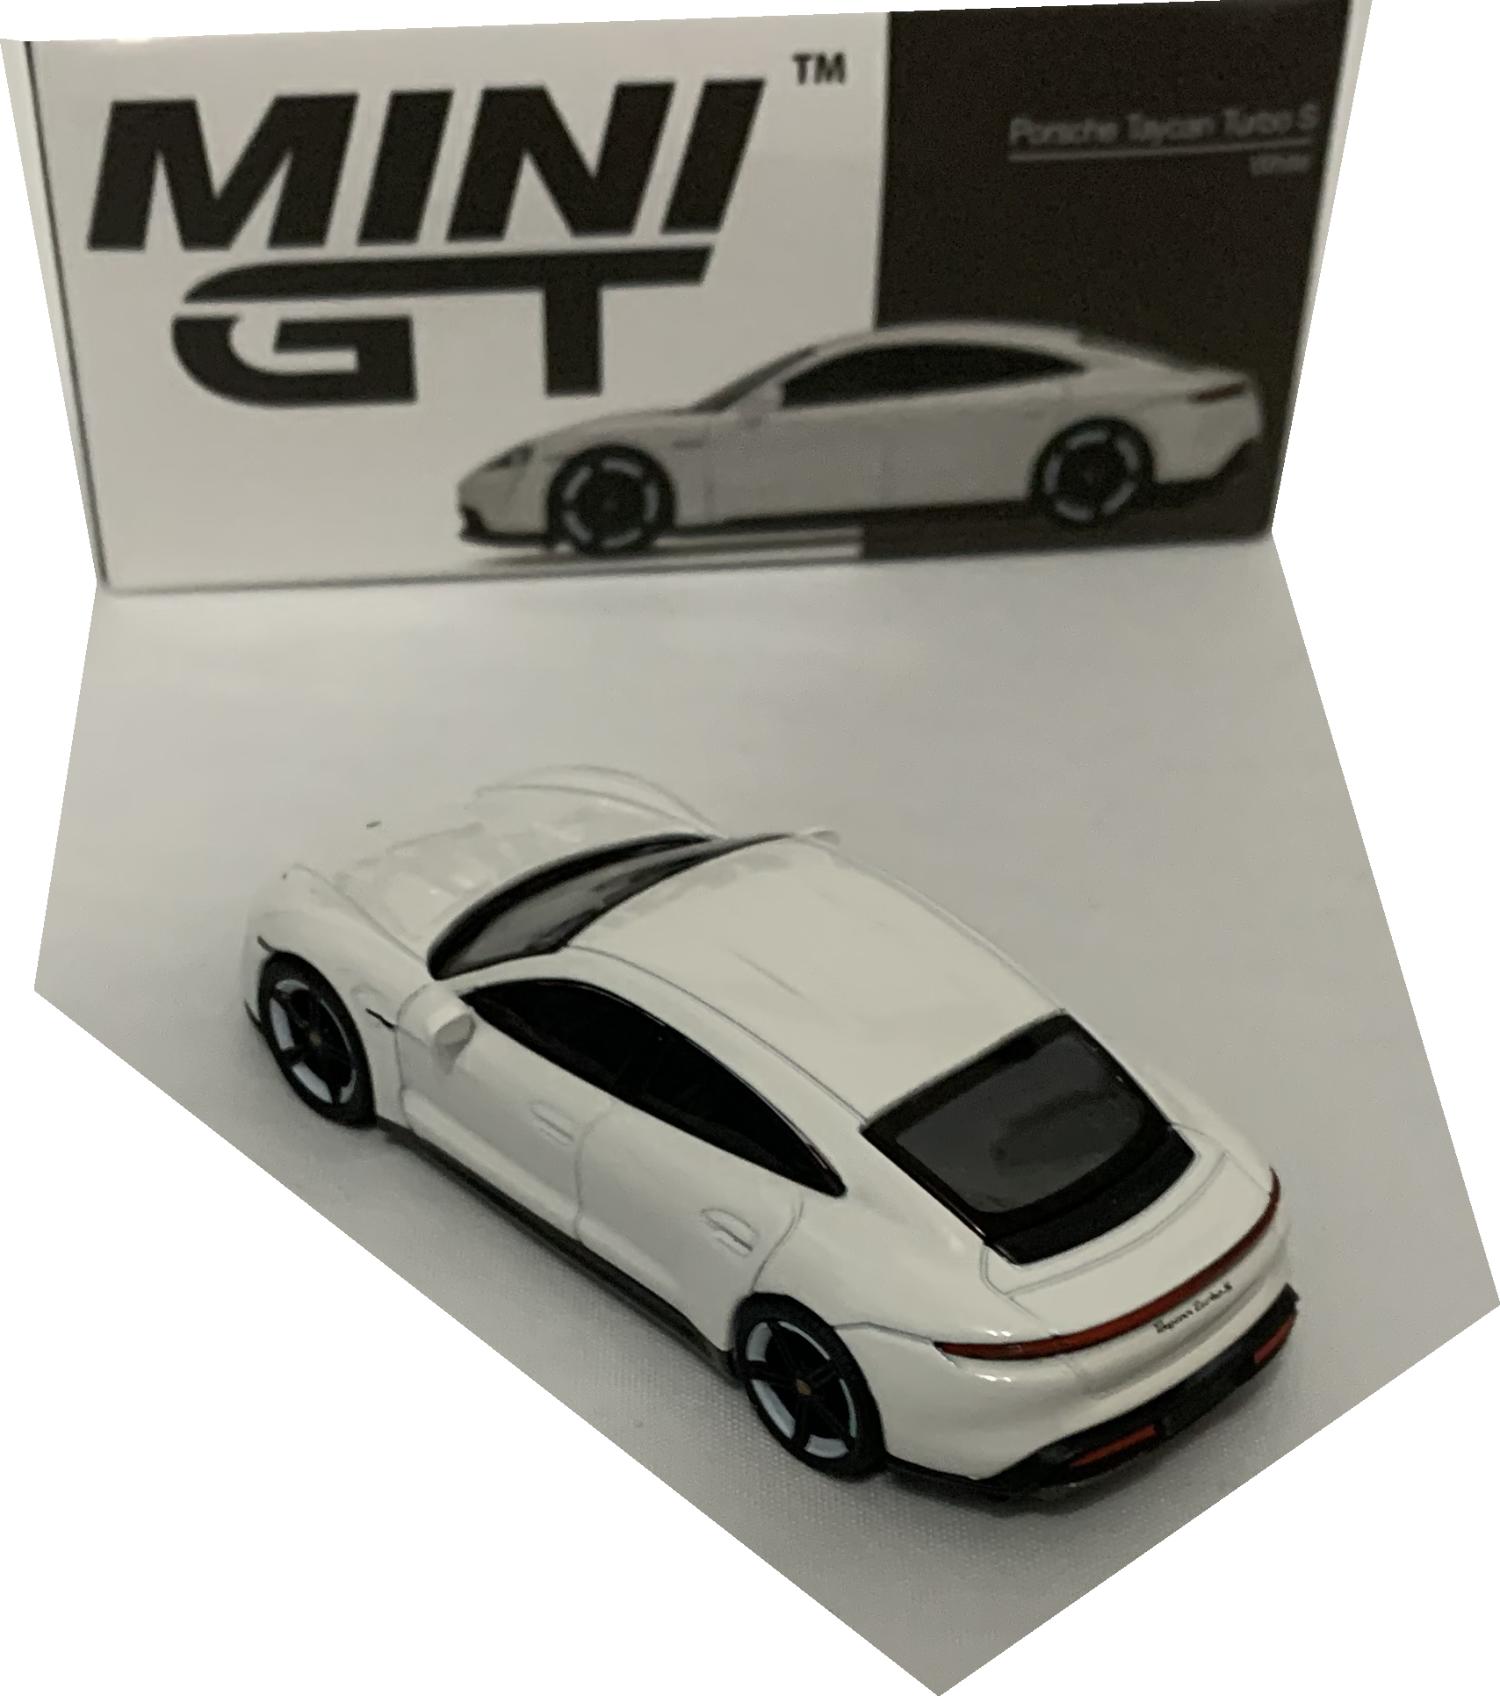 A good reproduction of the Porsche Taycan Turbo S with detail throughout, all authentically recreated.  The model is presented in a box, the car is approx. 8 cm long and the box is 10 cm long